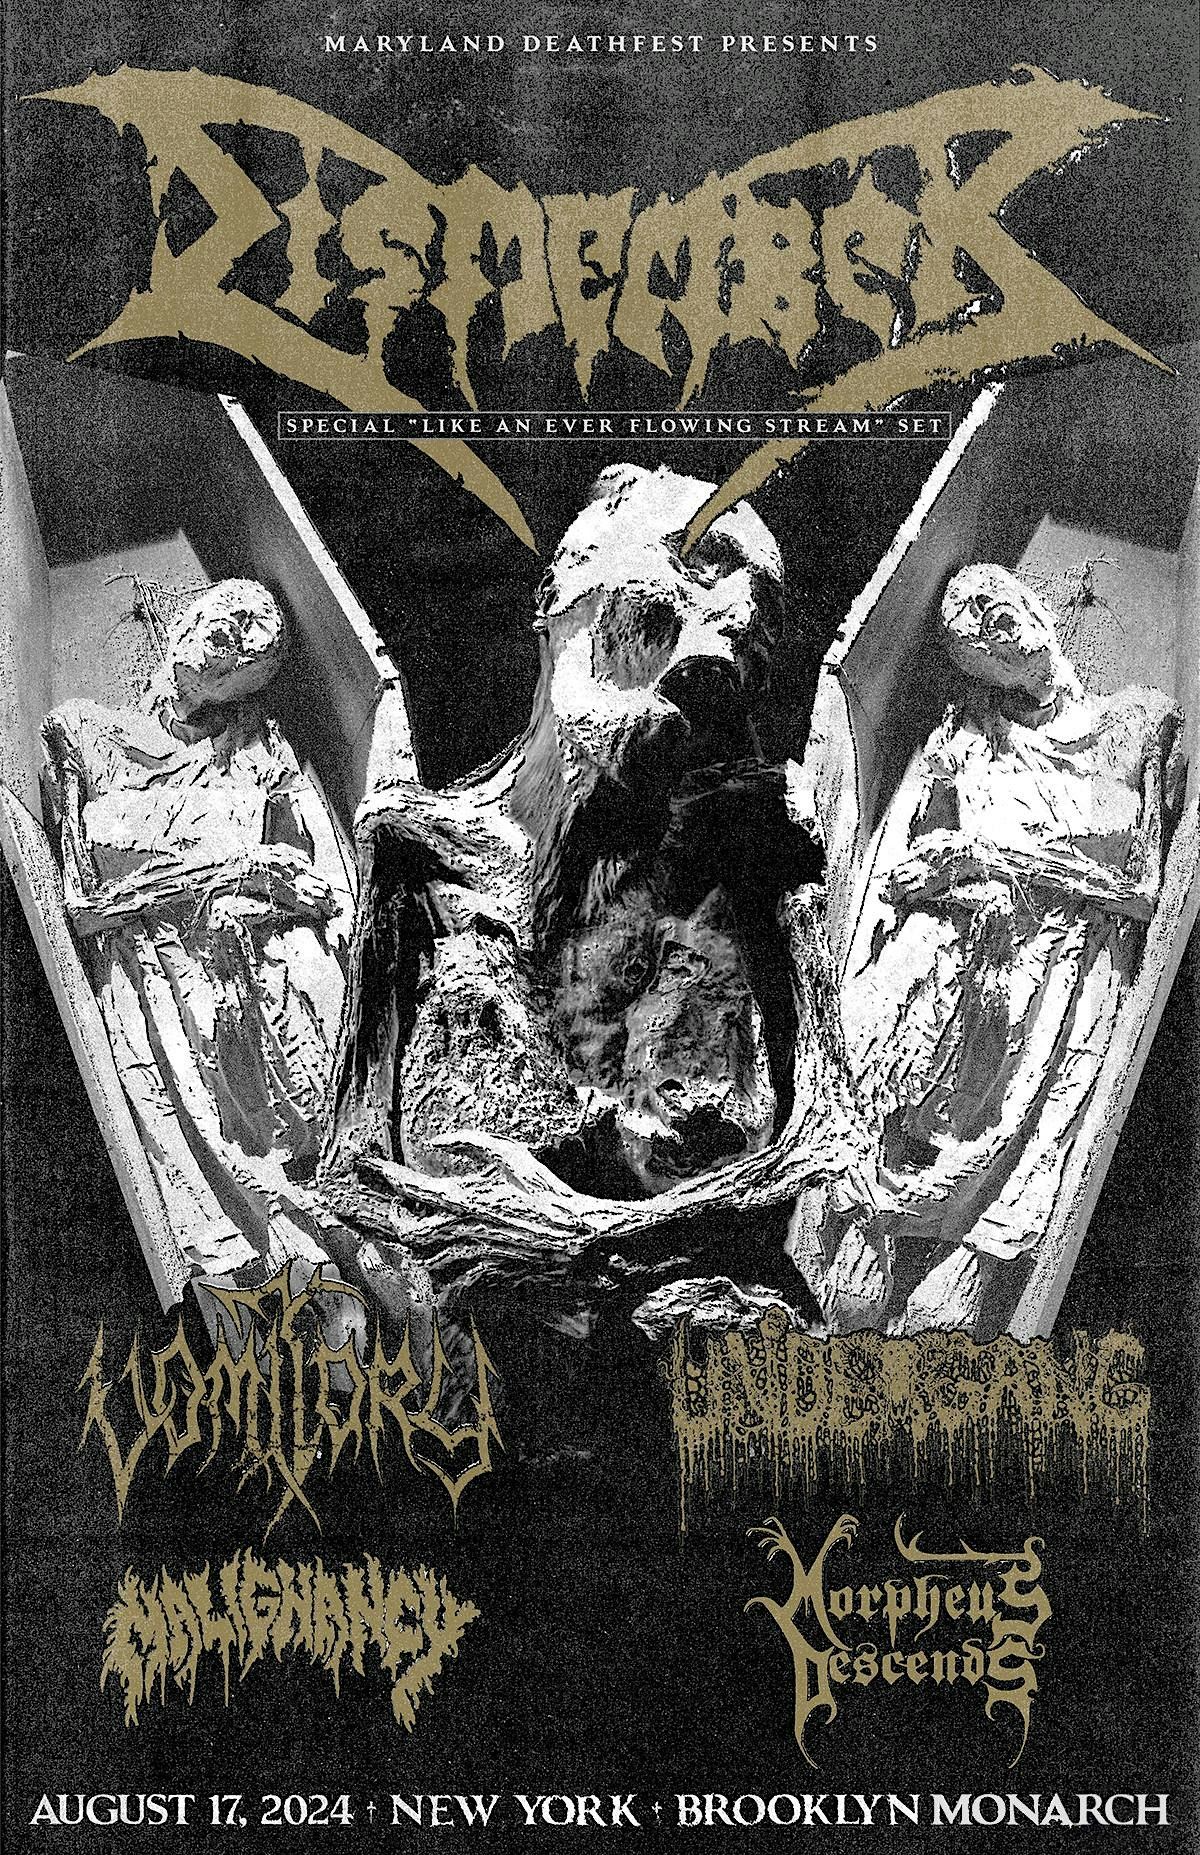 Dismember, Vomitory, Undergang, Morpheus Descends, Malignancy in NYC